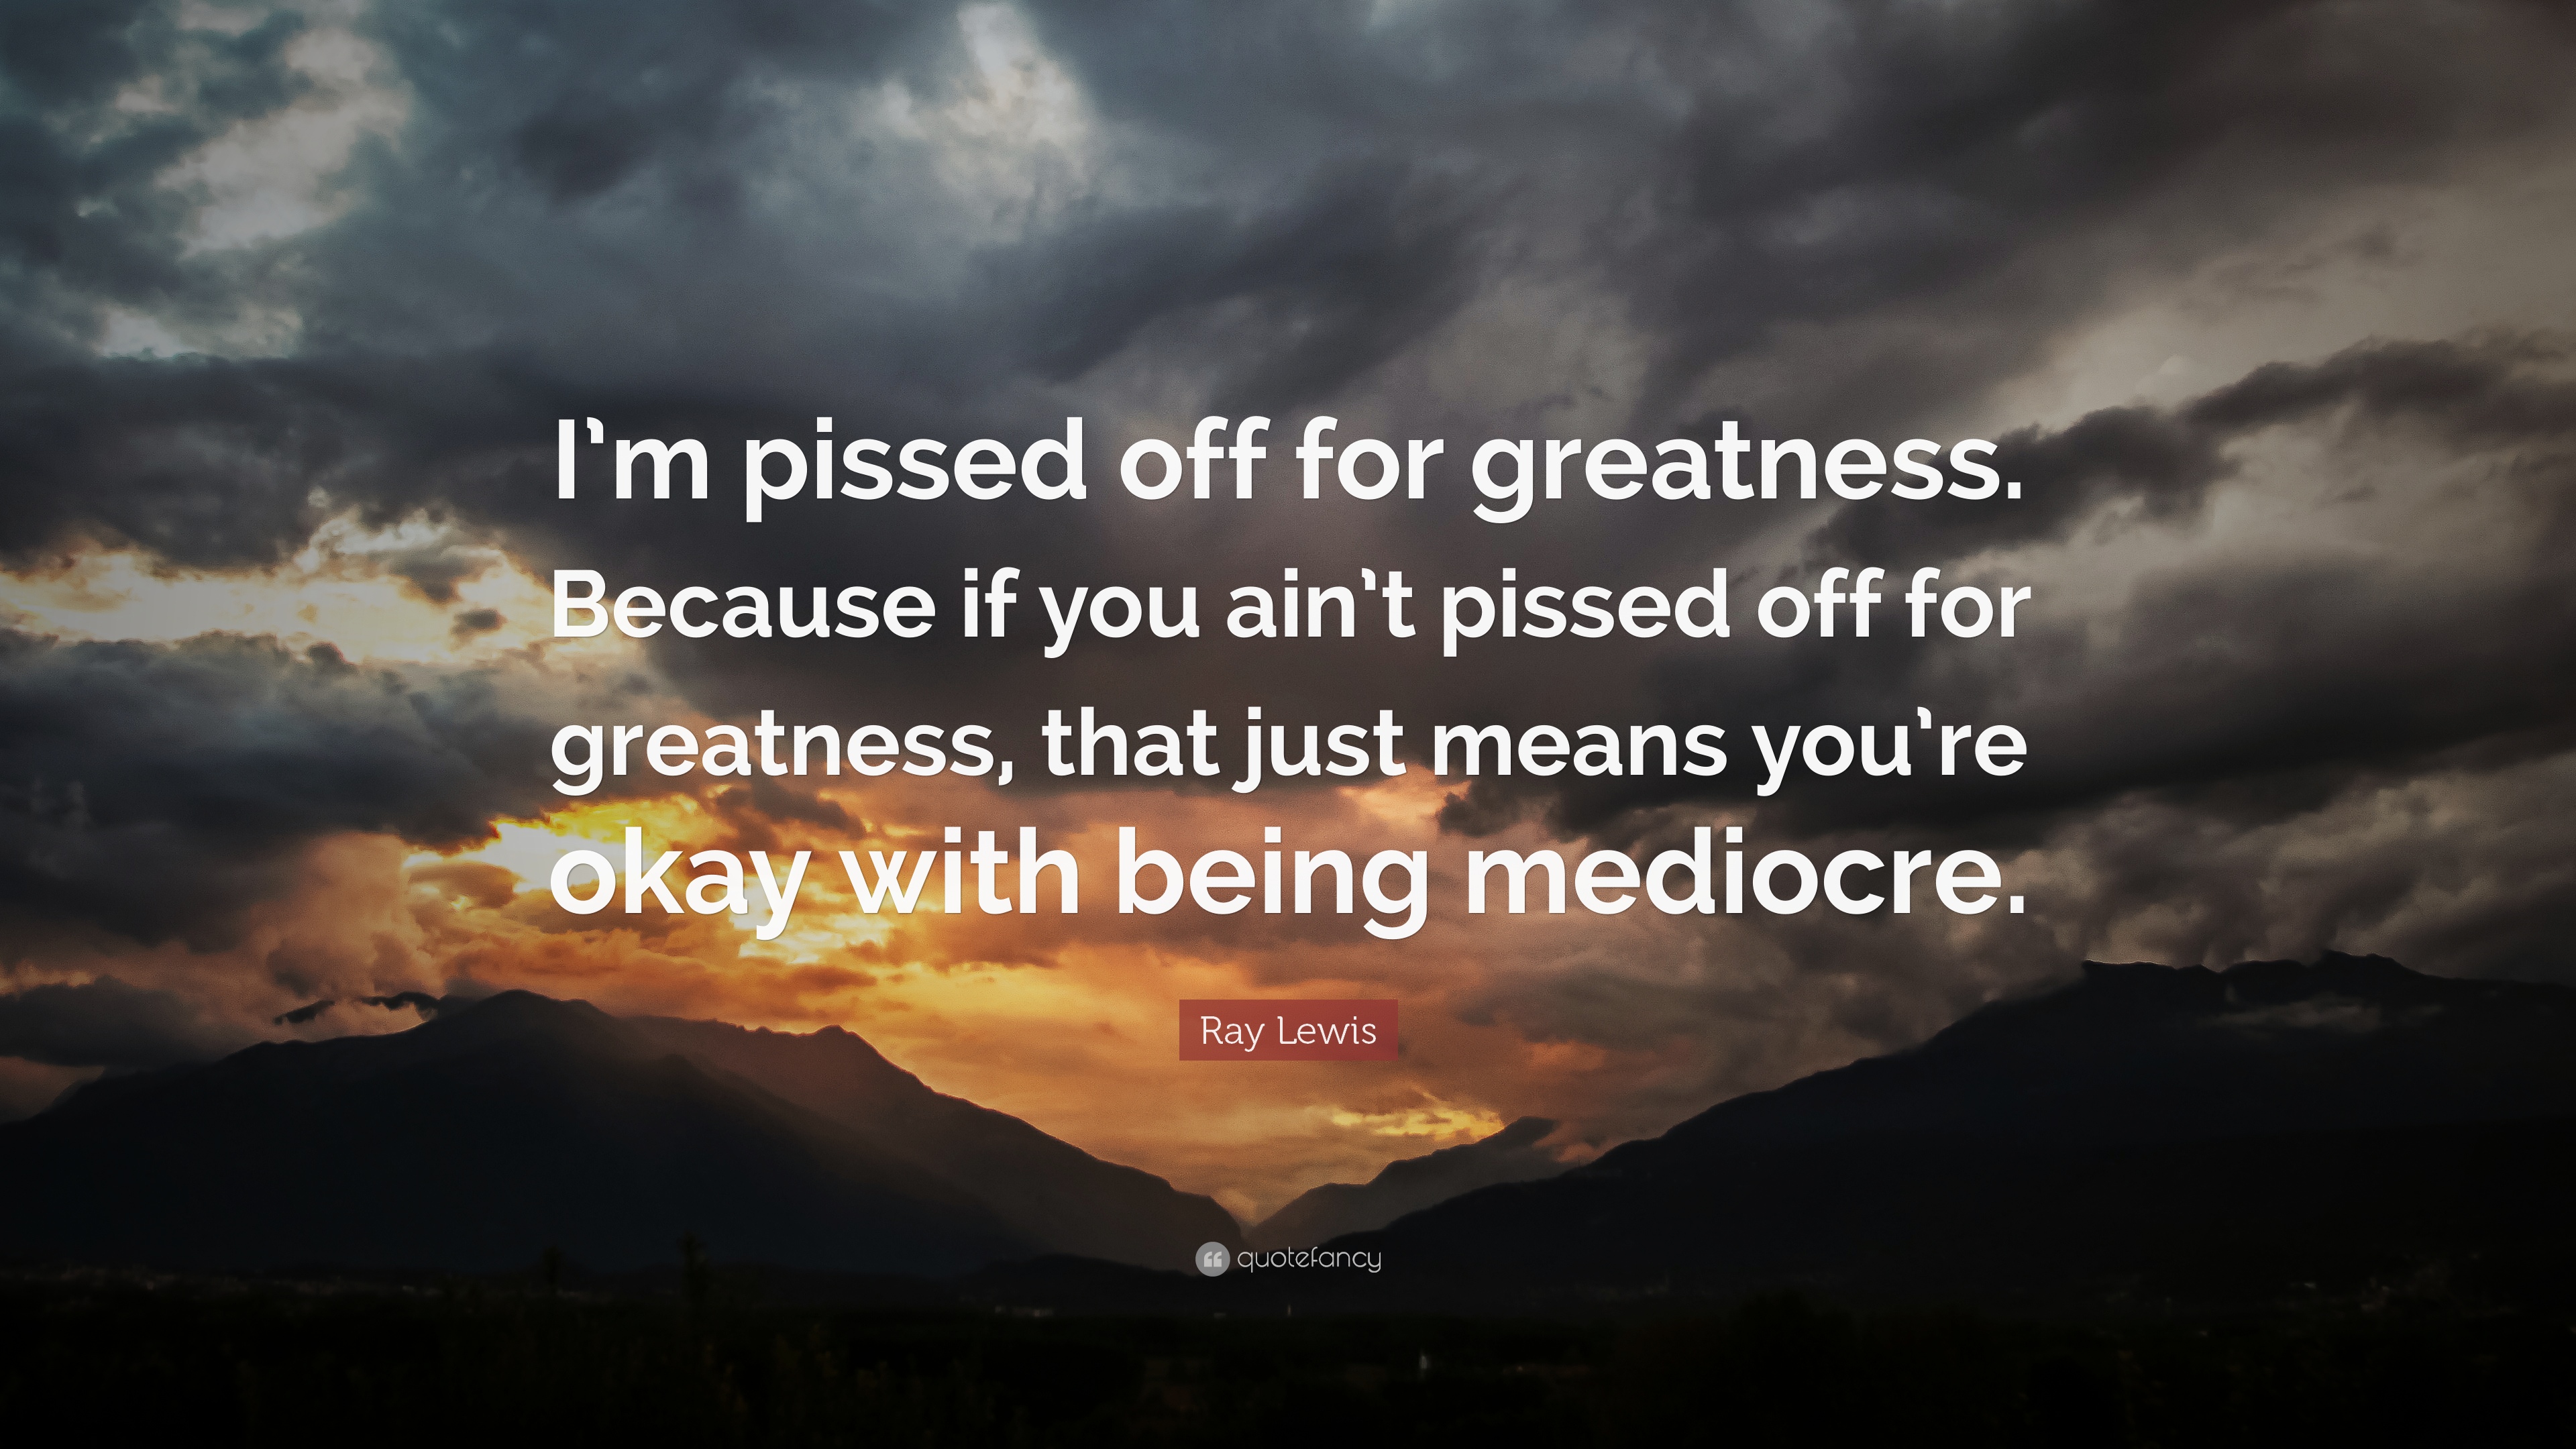 Ray Lewis Quote: “I'm pissed off for greatness. Because if you ain't pissed off for greatness, that just means you're okay with being medi.”